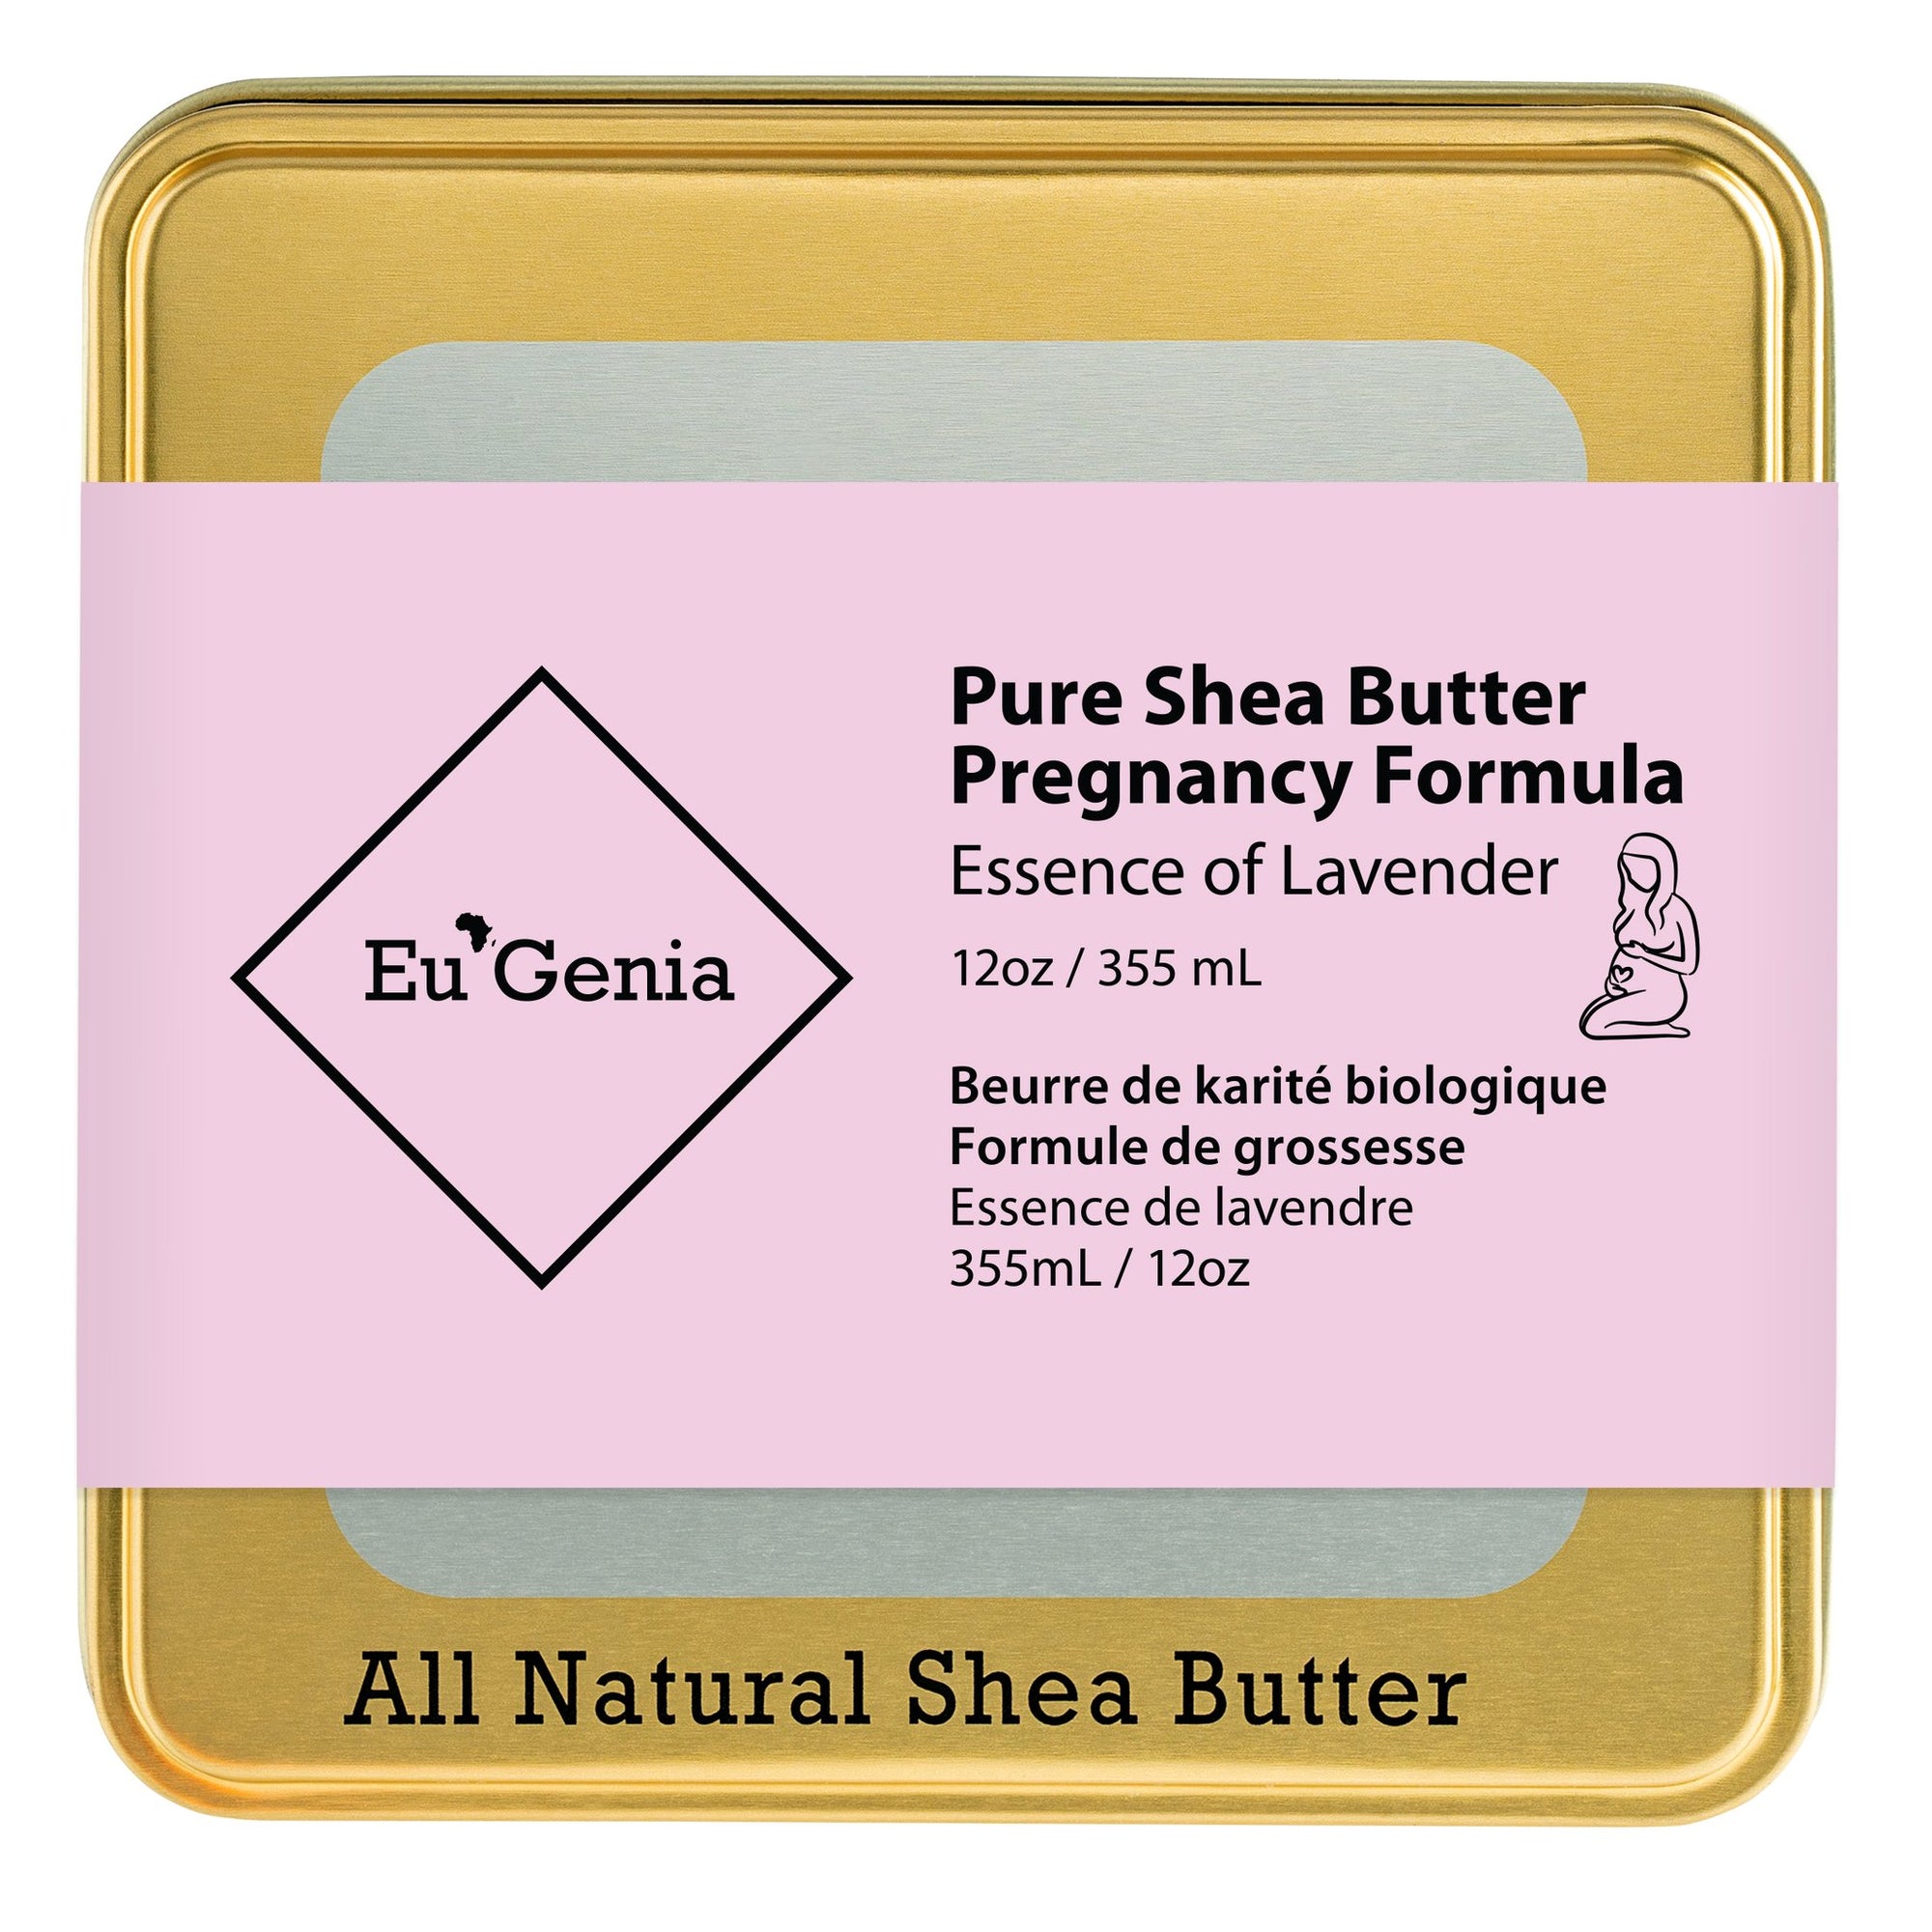 Gold Tin that reads "Pure Shea Butter Pregnancy Formula Essence of Lavender" on a white background